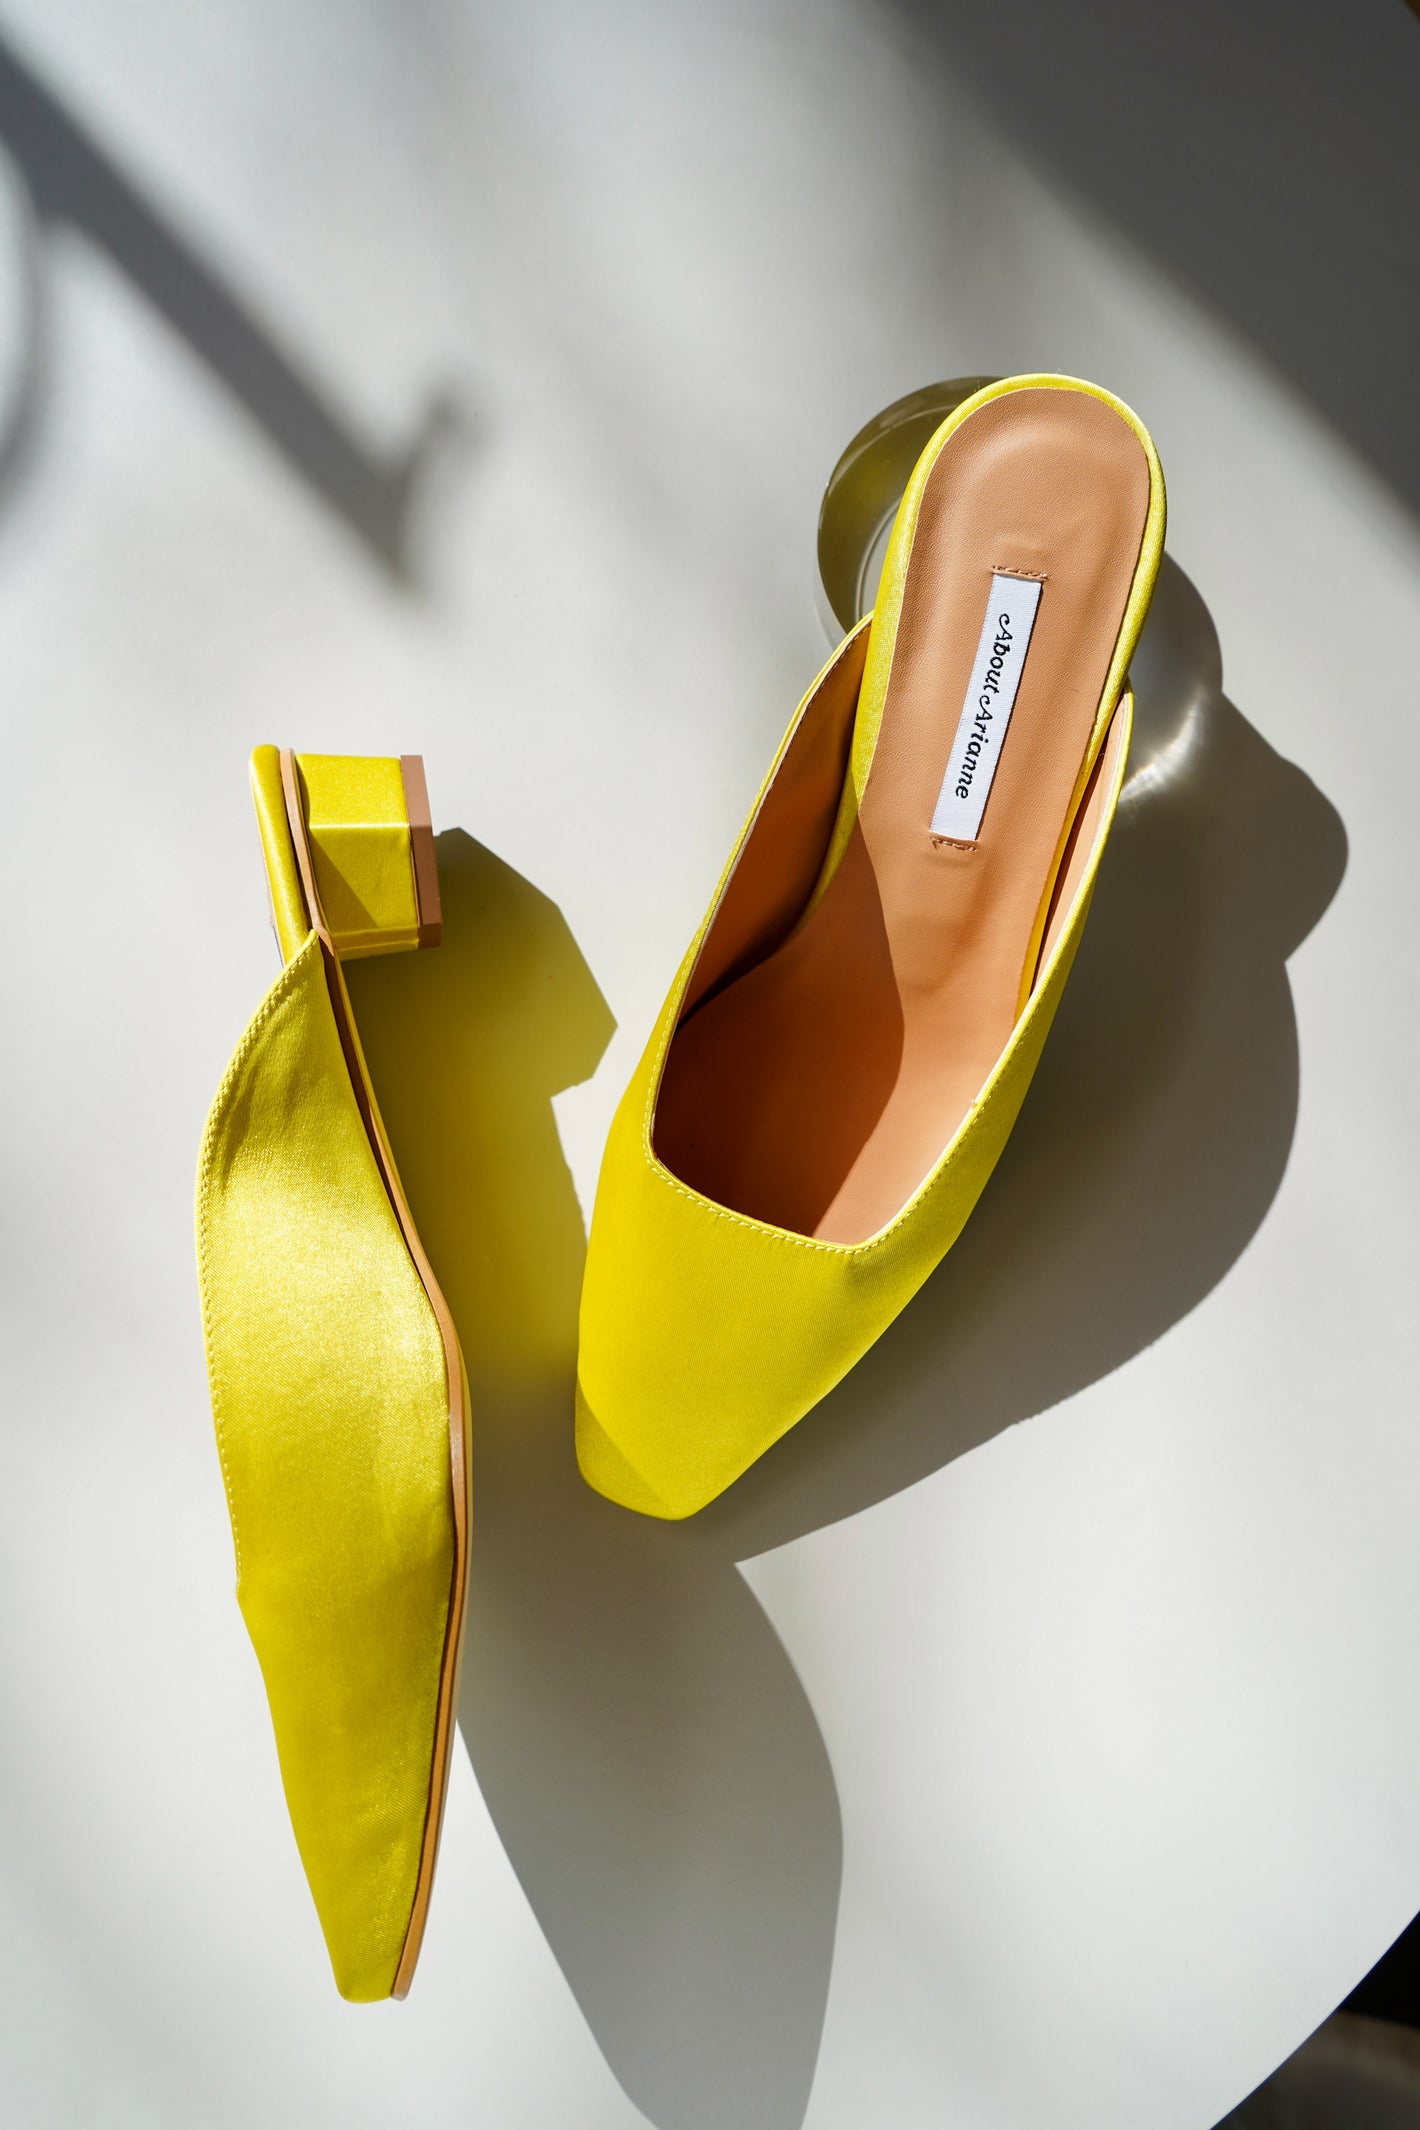 Yellow satin kitten heel mules sit on a white table in afternoon sunlight | Image by Lacey Woodroof for basic.